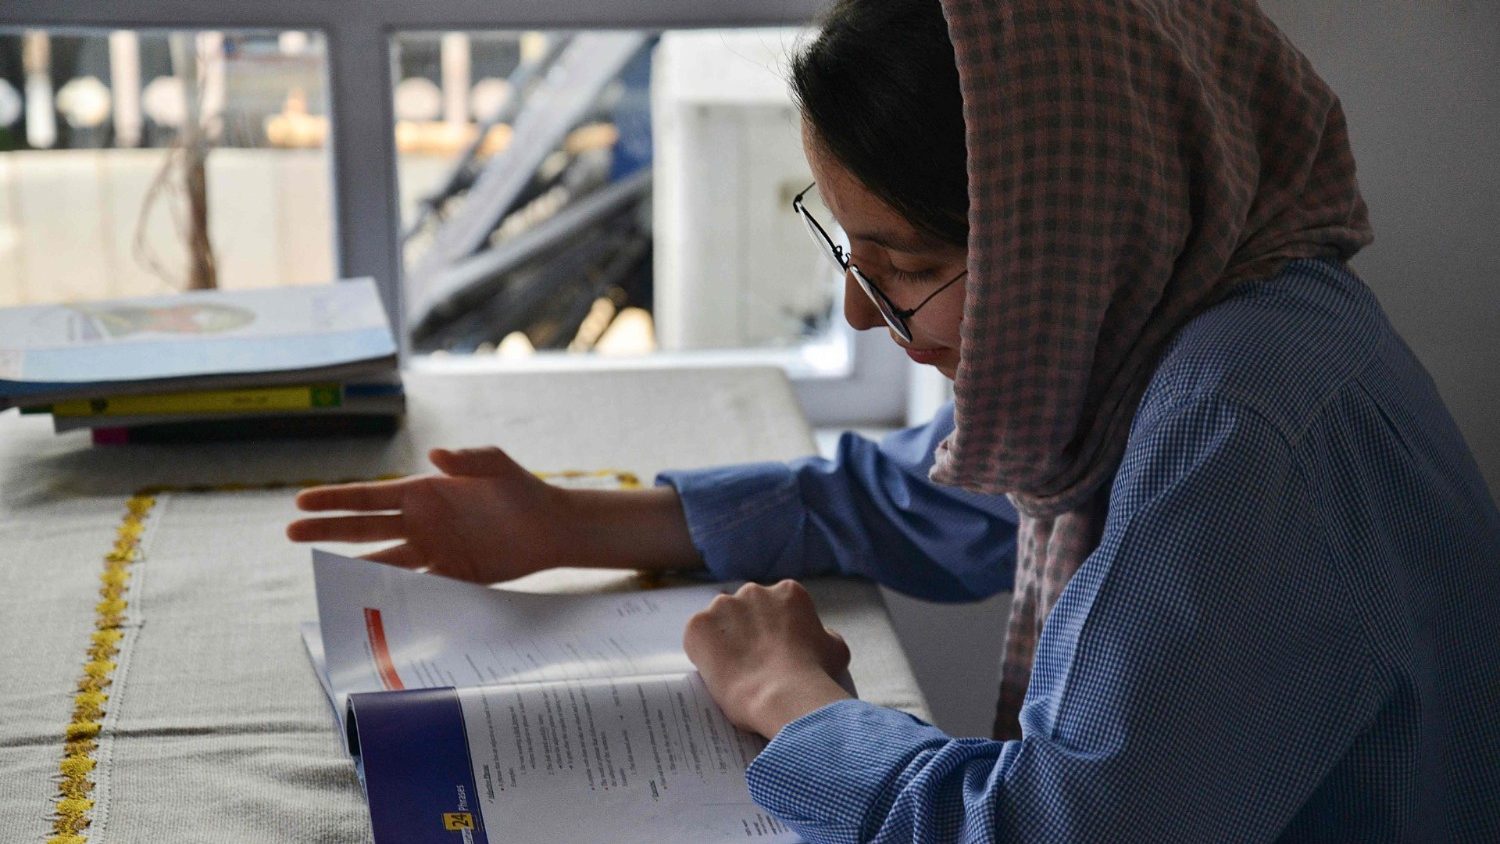 Foreign ministers demand Afghan girls go to school